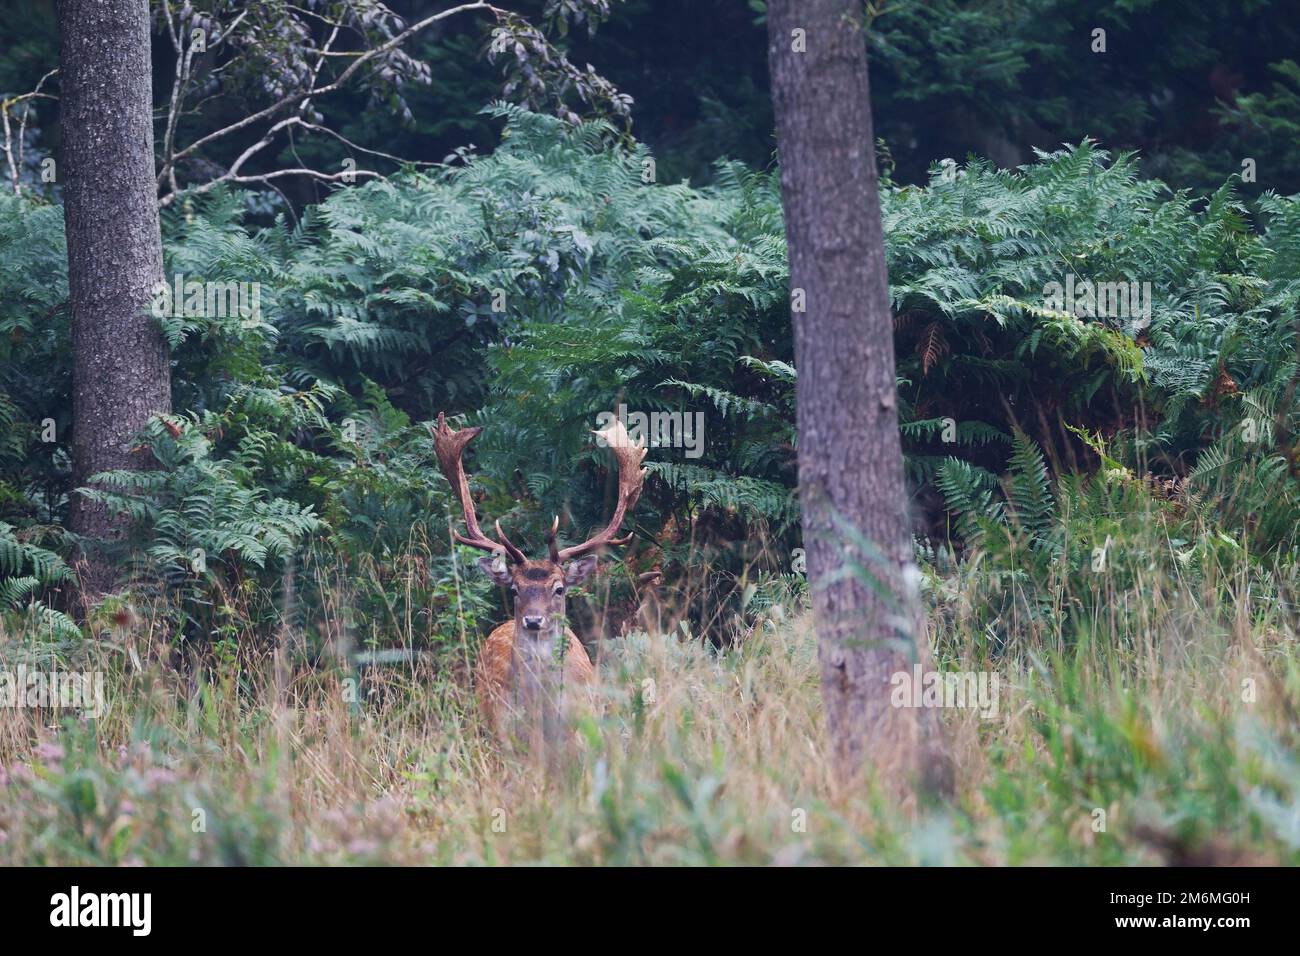 A Fallow Deer buck in front of a fern thicket Stock Photo